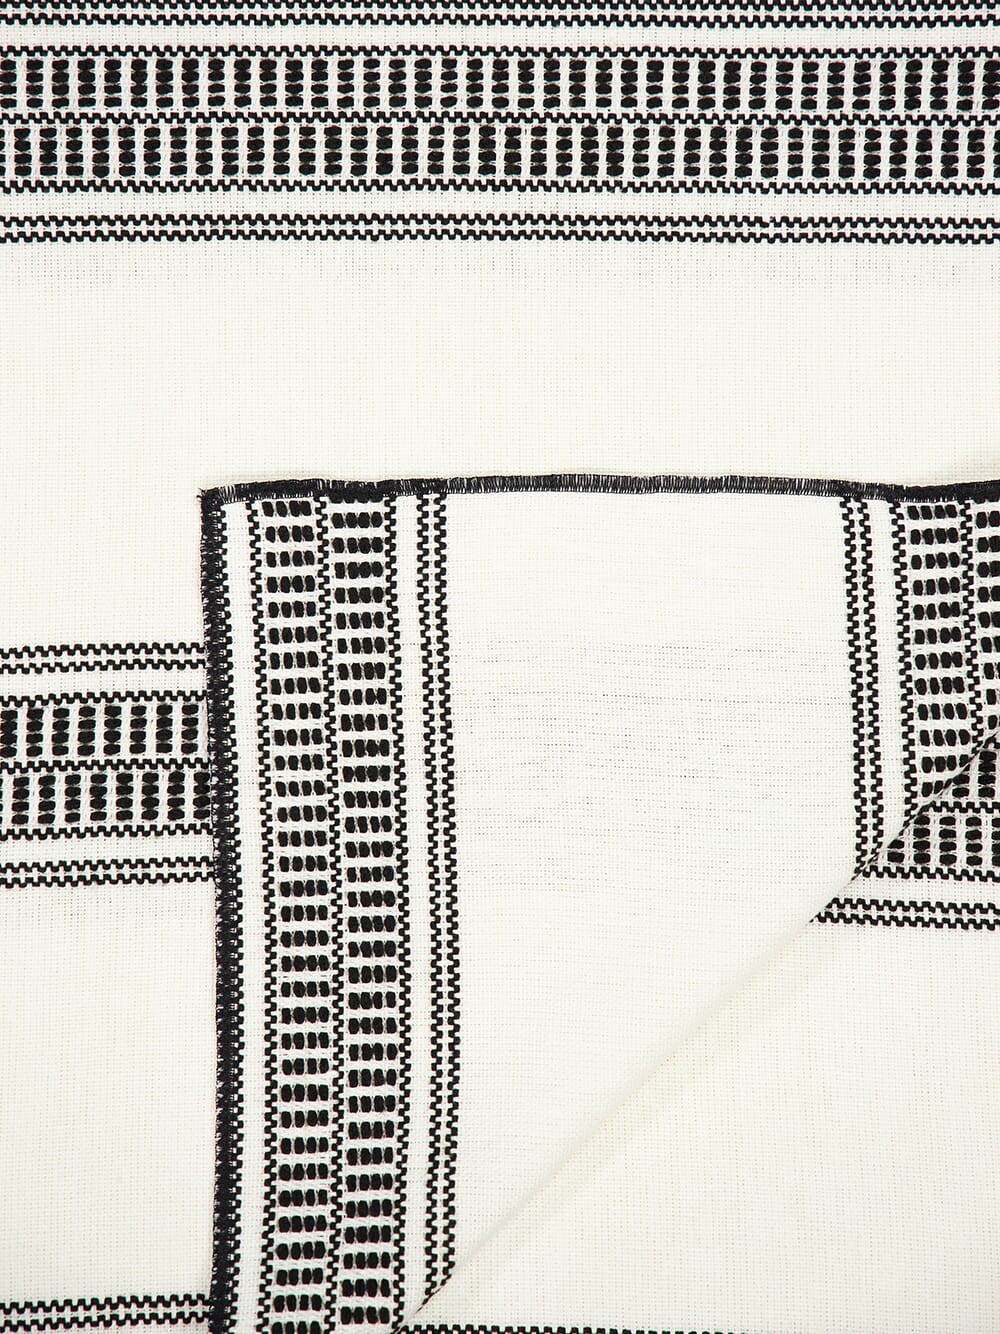 Vice Versa Embroidered Canvas Cyclades Black Throw